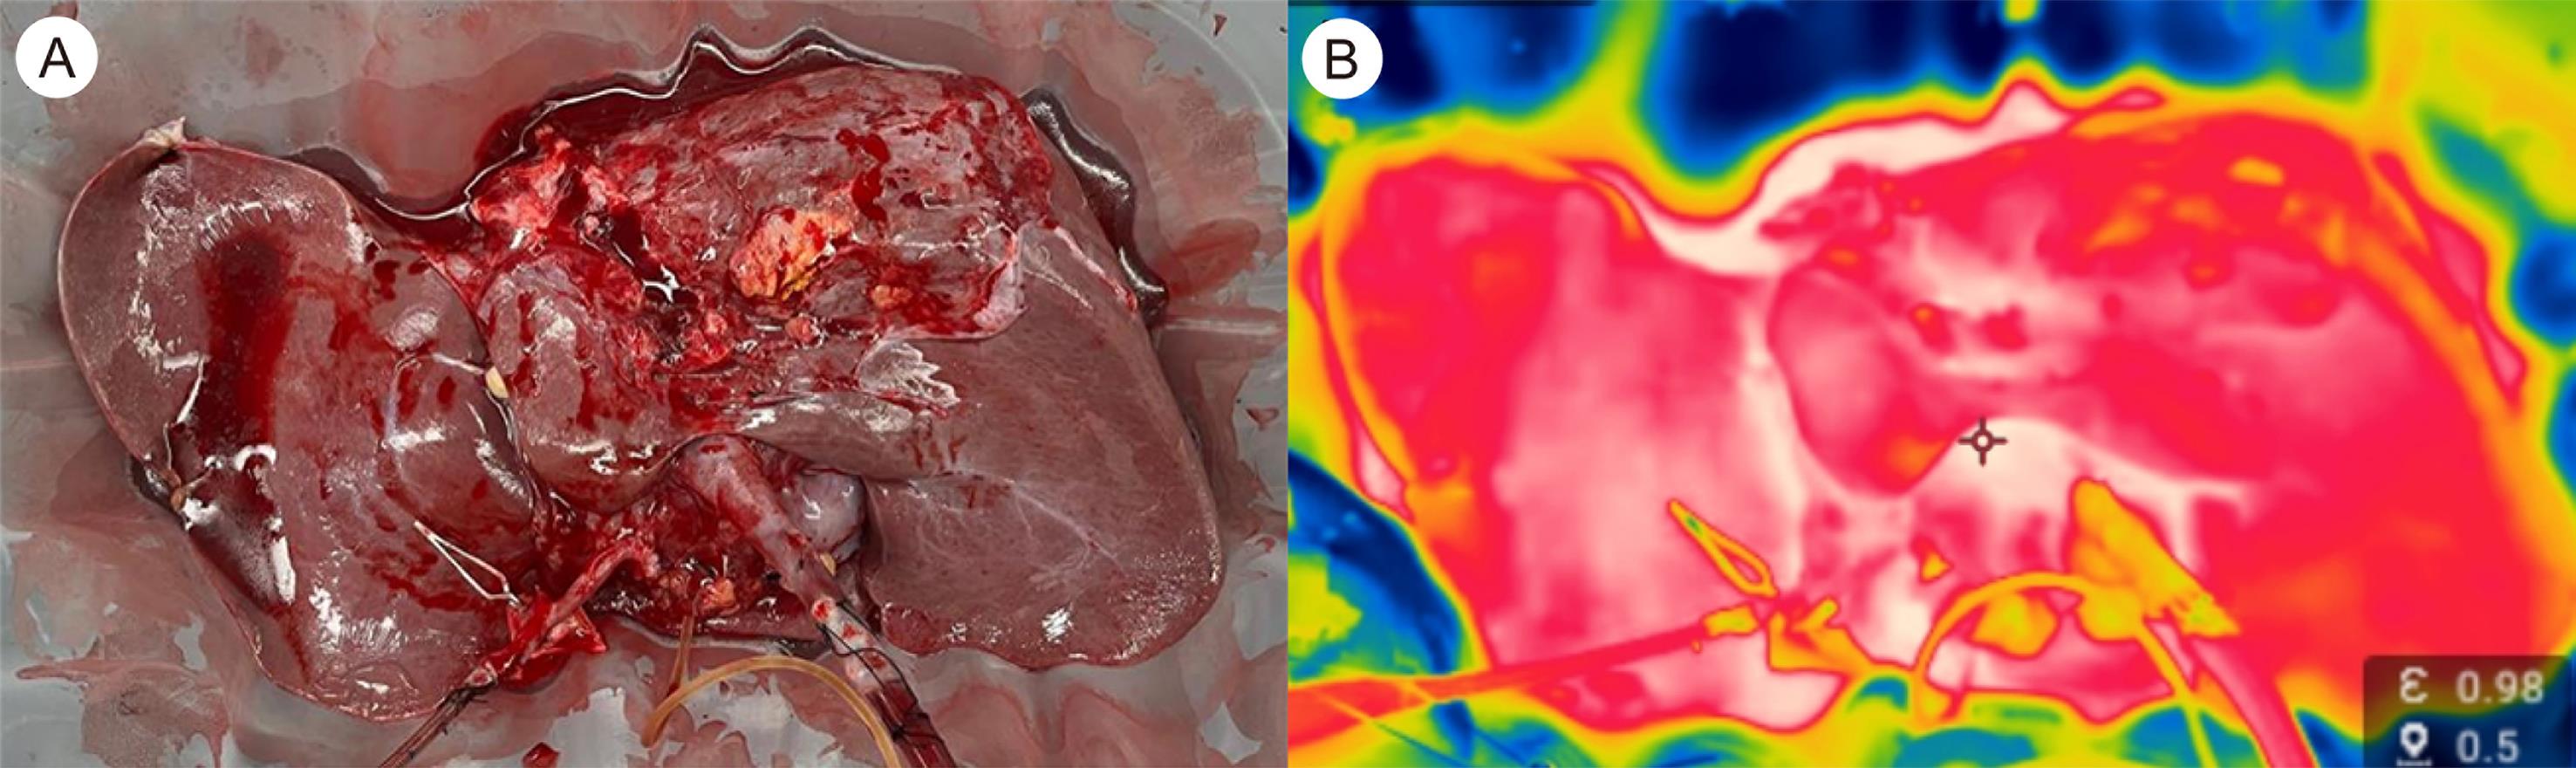 (A) Appearance of the liver and (B) thermal imaging of the liver during perfusion.